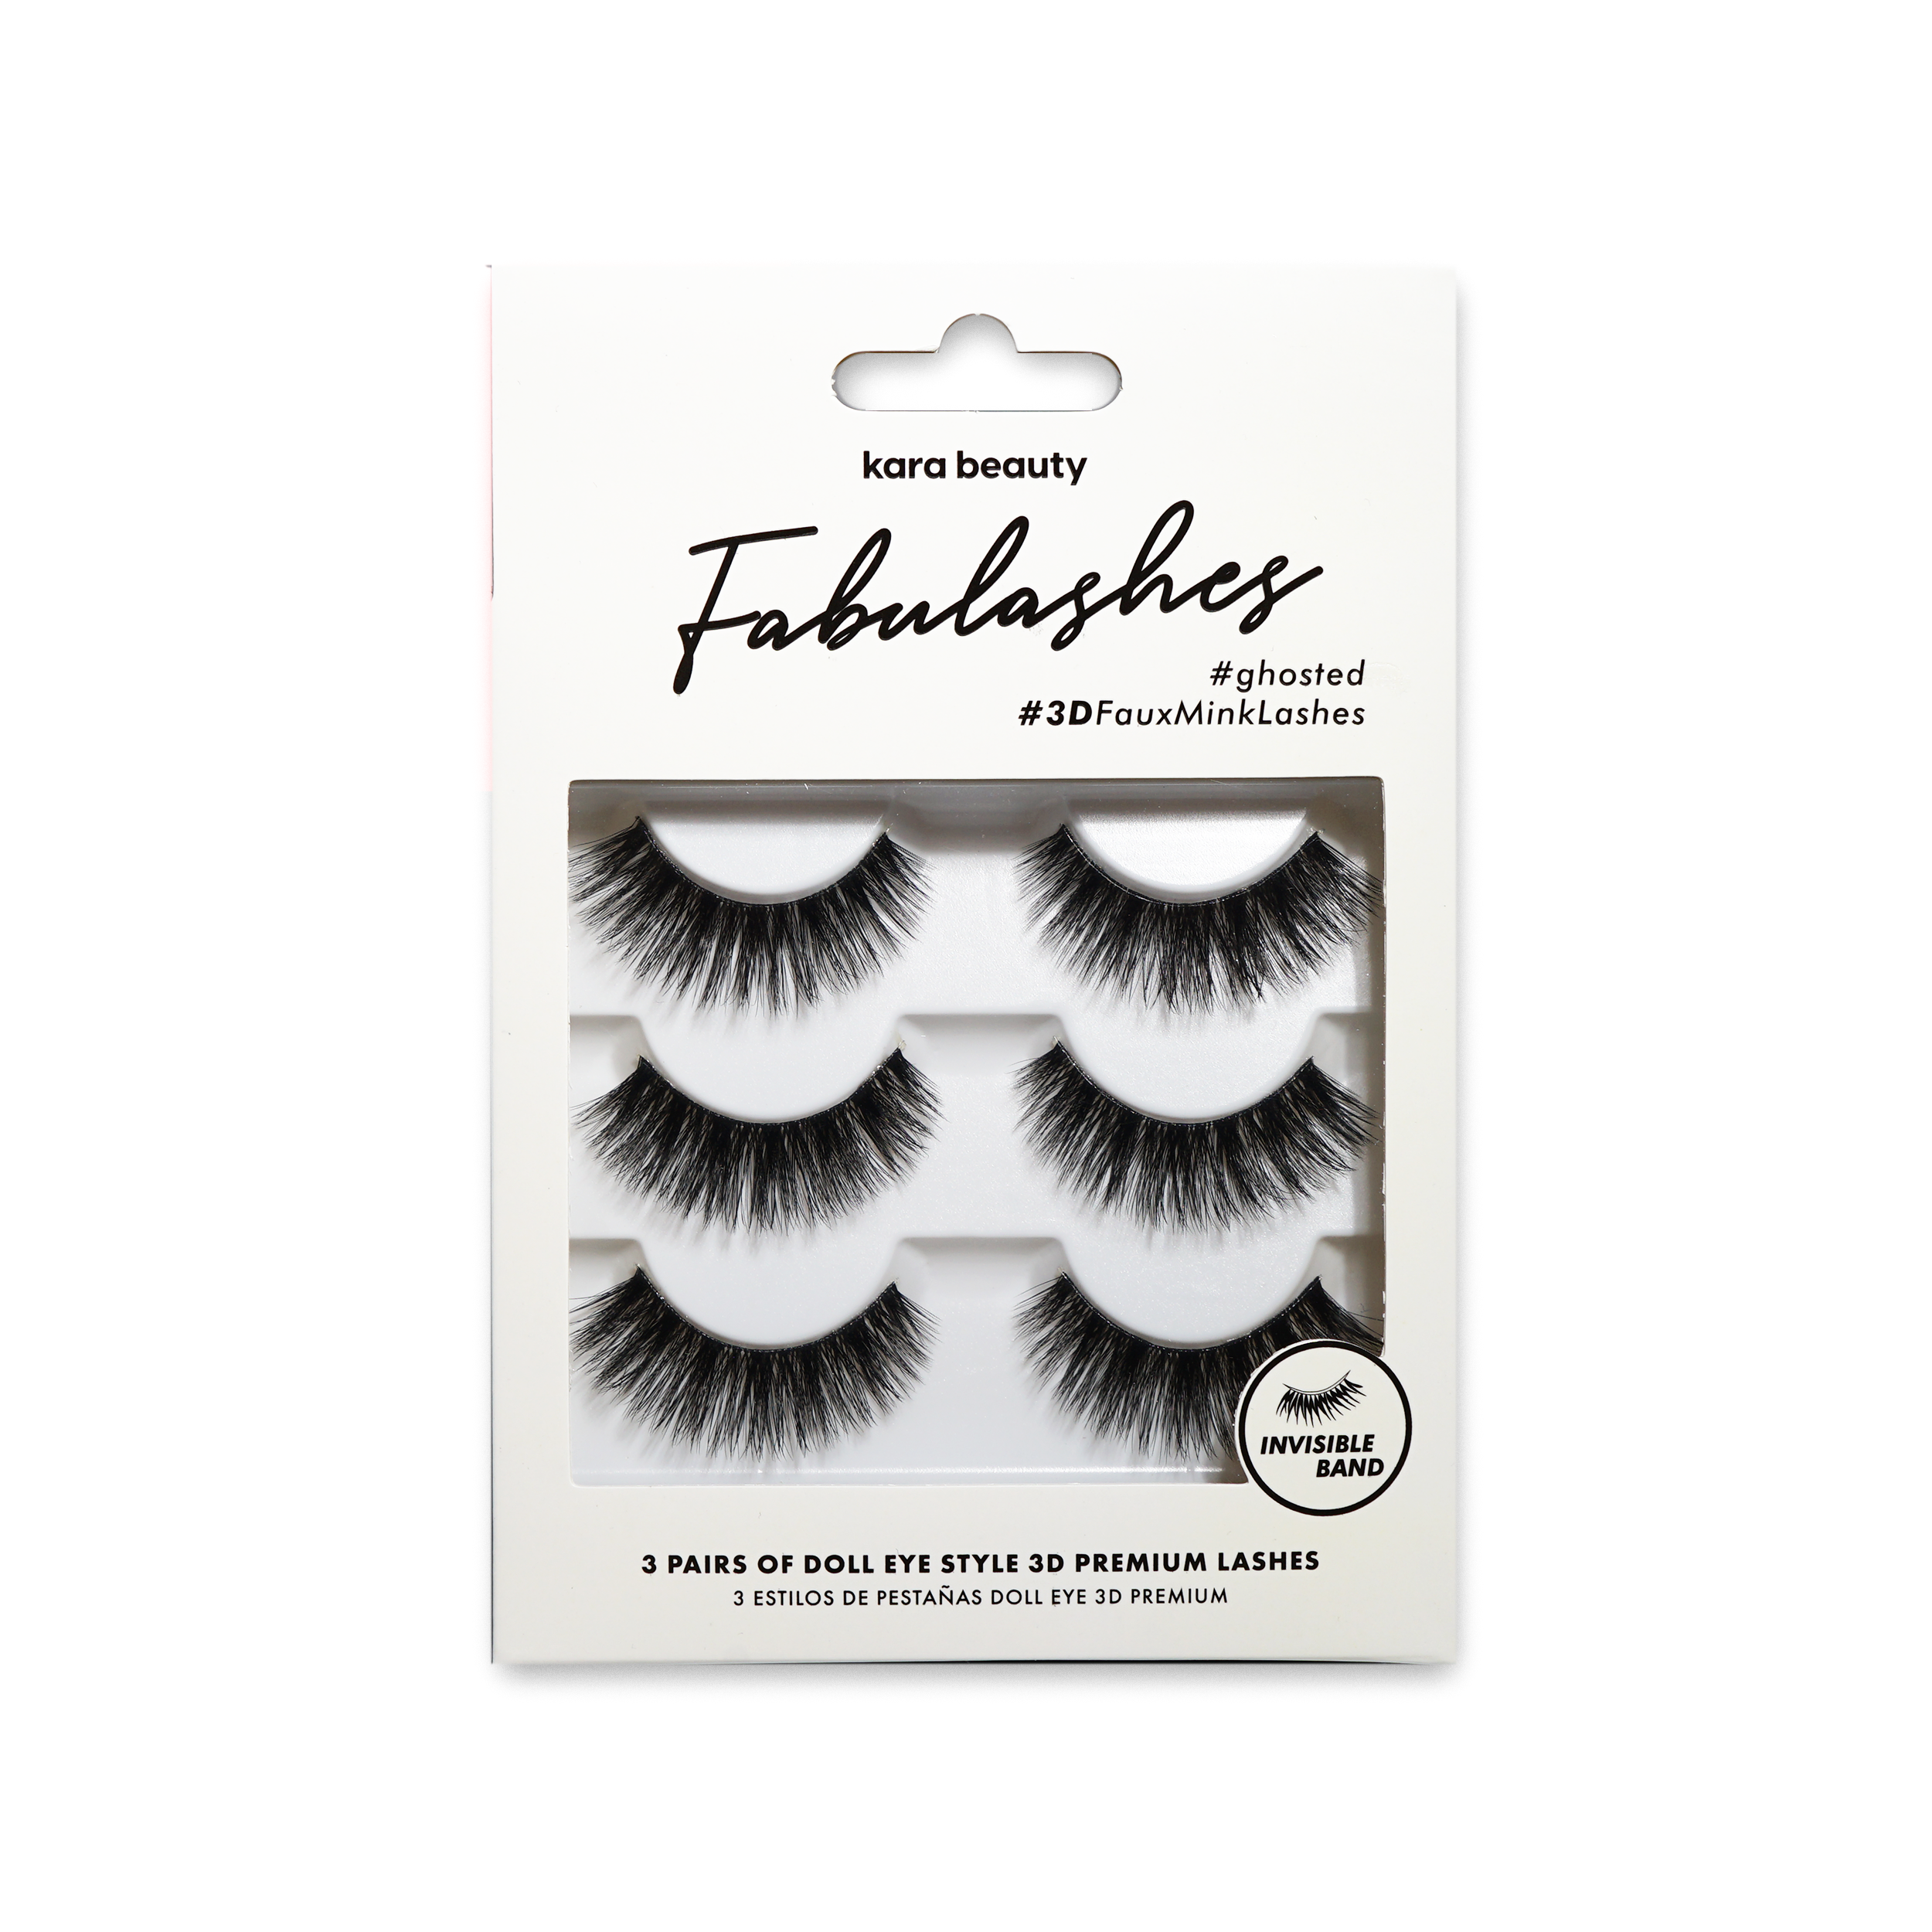 IBLK303 GHOSTED Invisible Band 3 Pack Fabulashes 3D Faux Mink Lashes